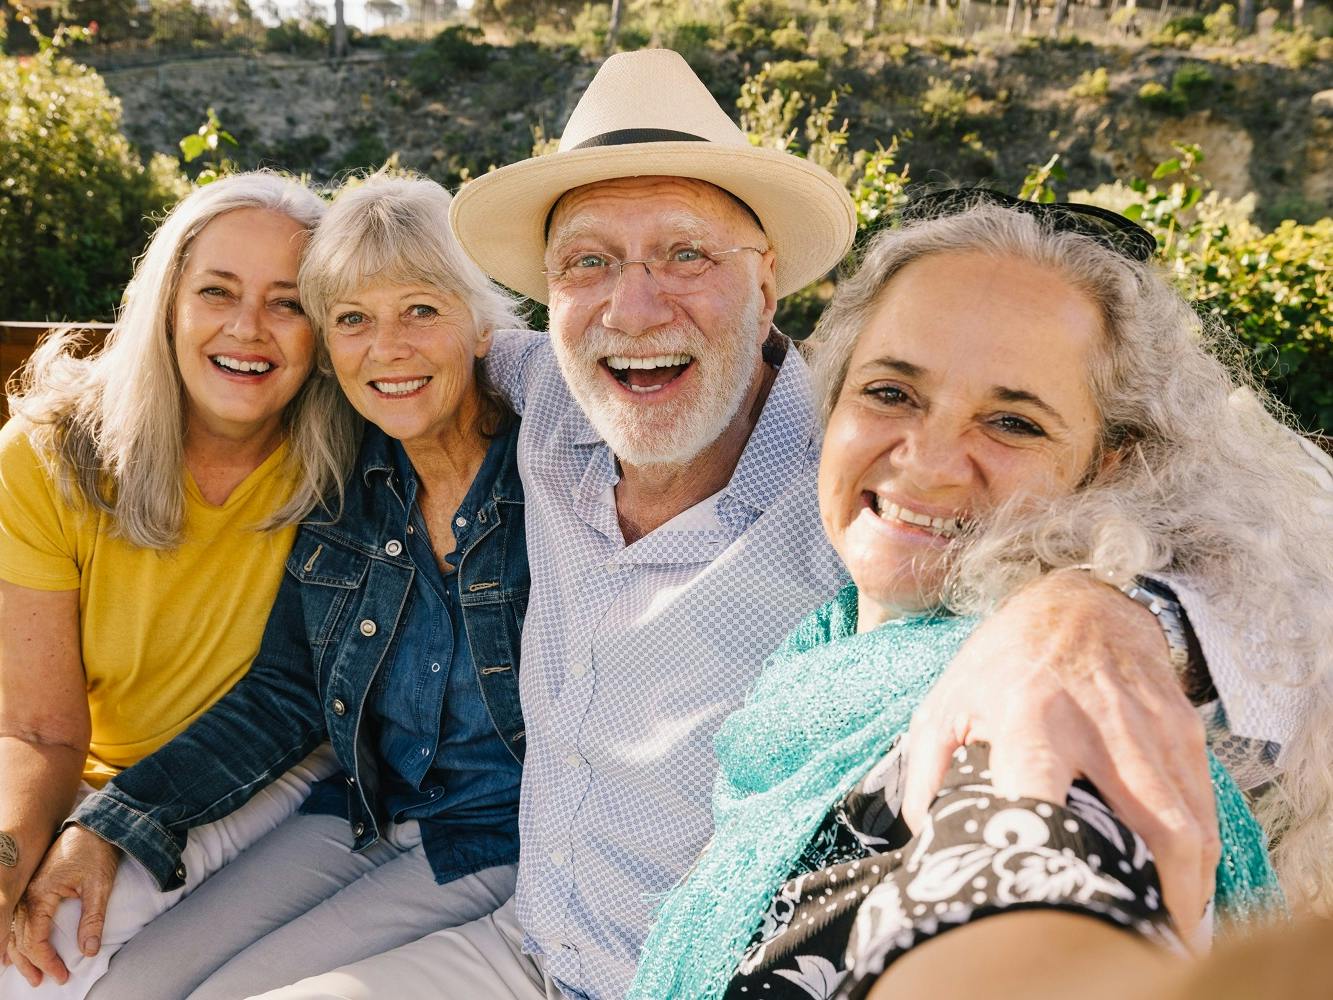 6 Tips for Making Friends During Retirement